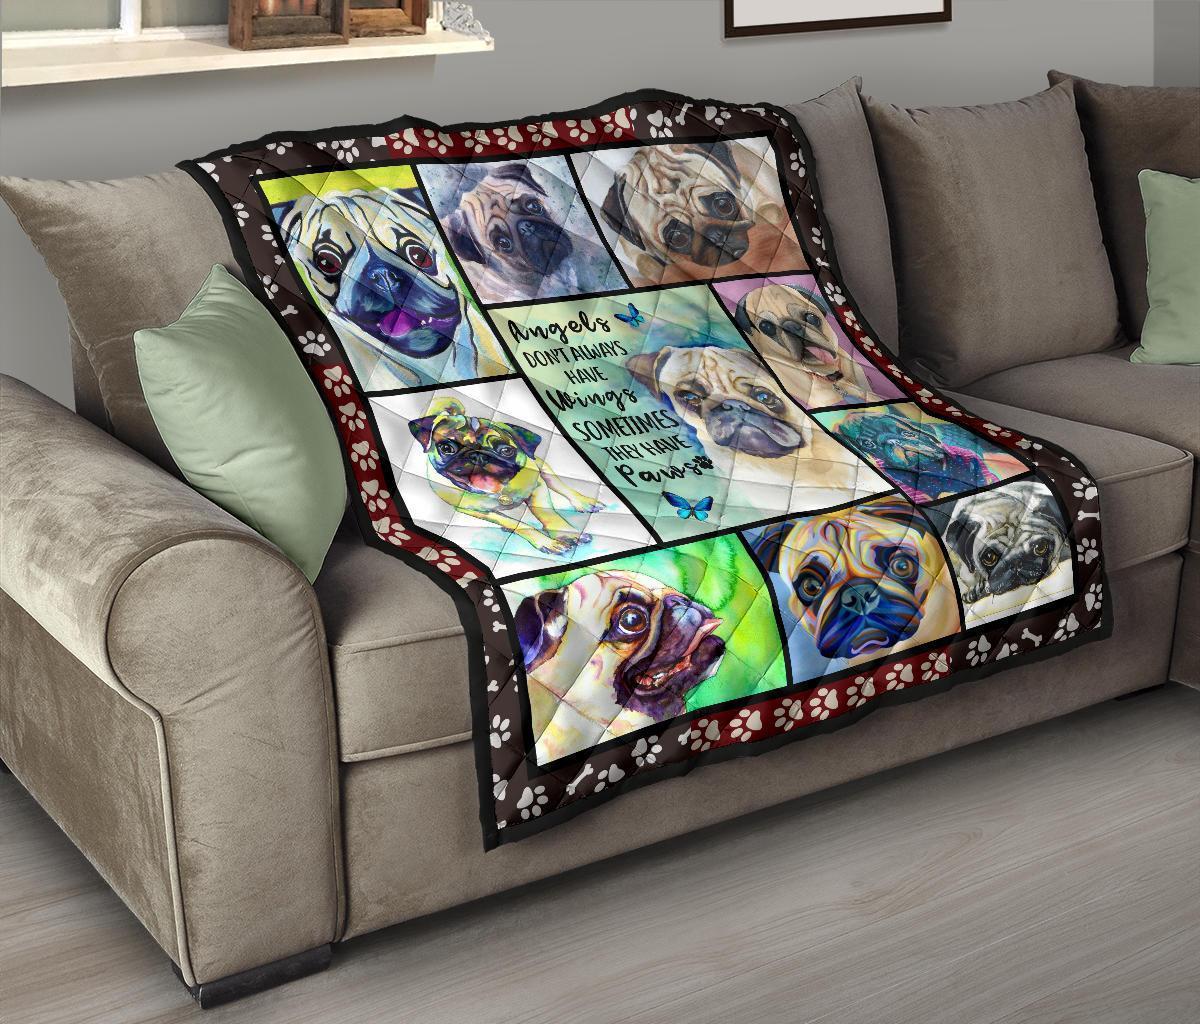 Pug Dog Quilt Blanket Angels Sometimes Have Paws-Gear Wanta